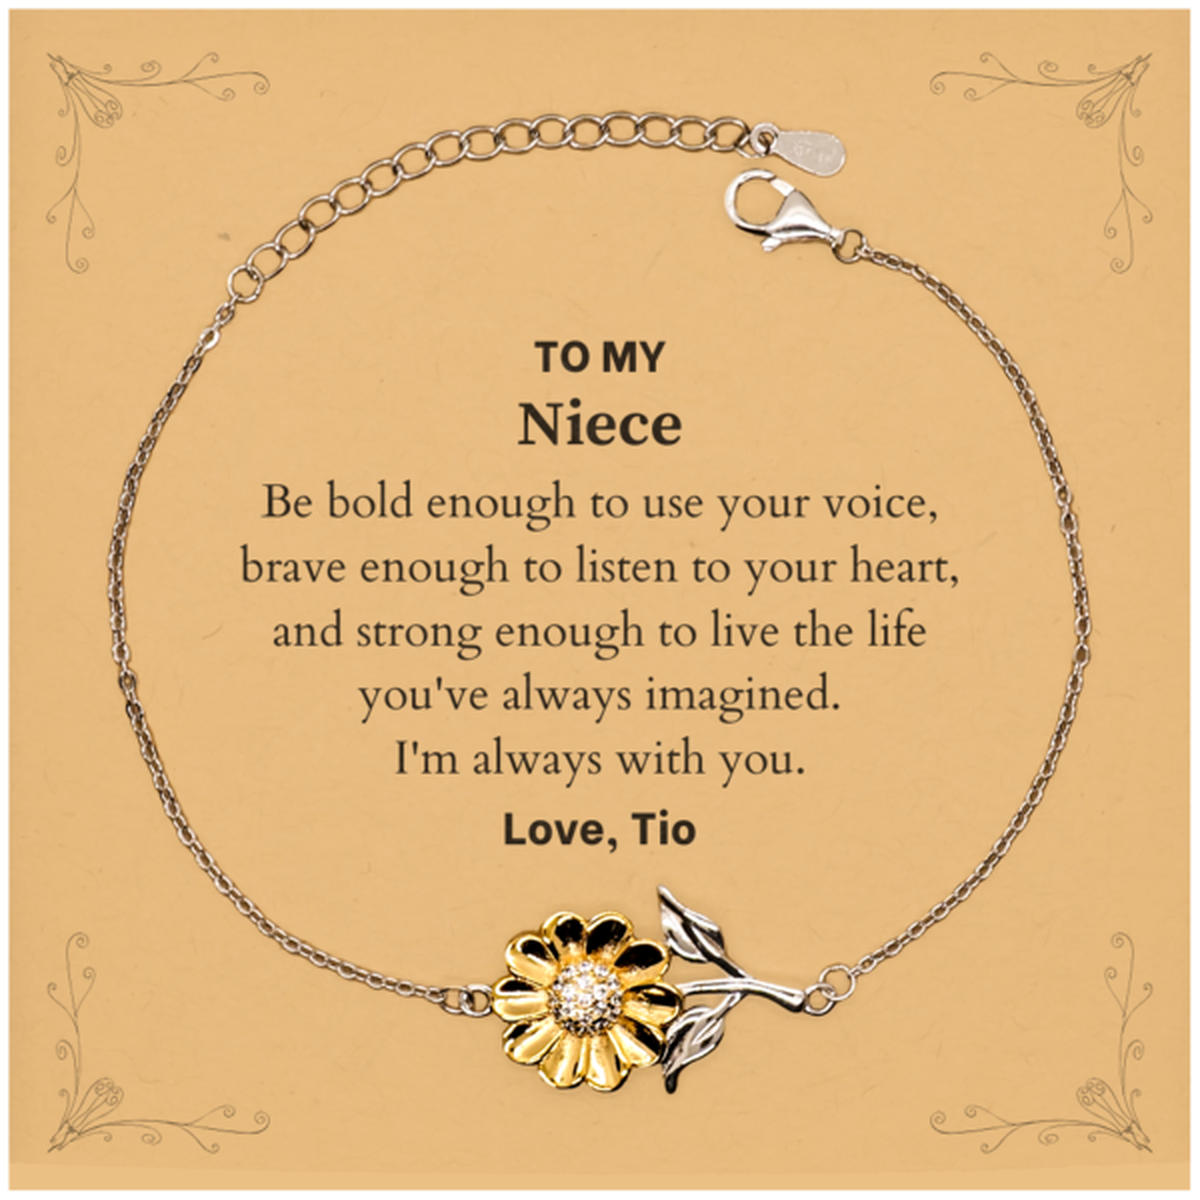 Keepsake Niece Sunflower Bracelet Gift Idea Graduation Christmas Birthday Niece from Tio, Niece Be bold enough to use your voice, brave enough to listen to your heart. Love, Tio